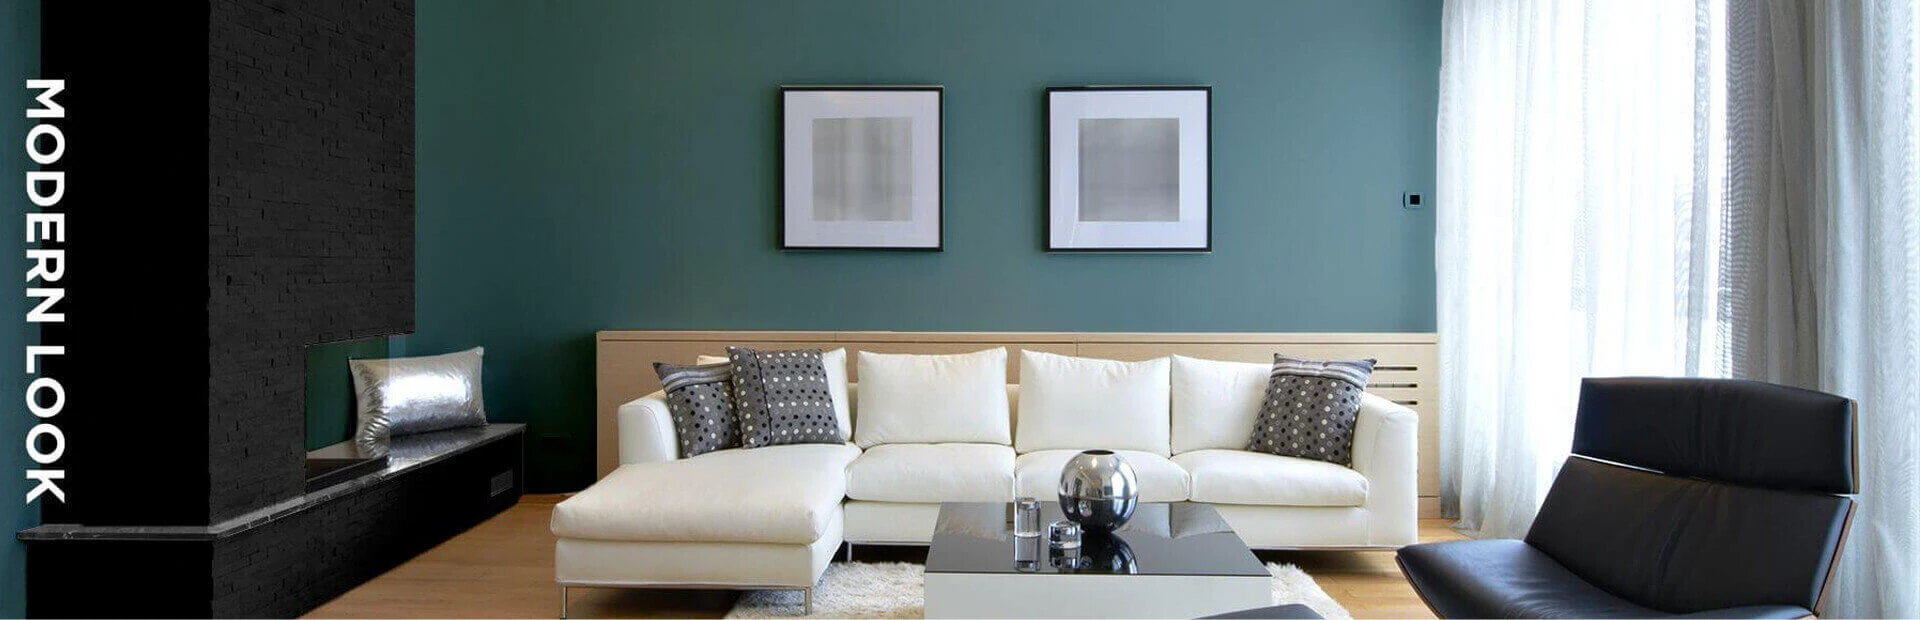 Living room with black, beige and green colour palette.